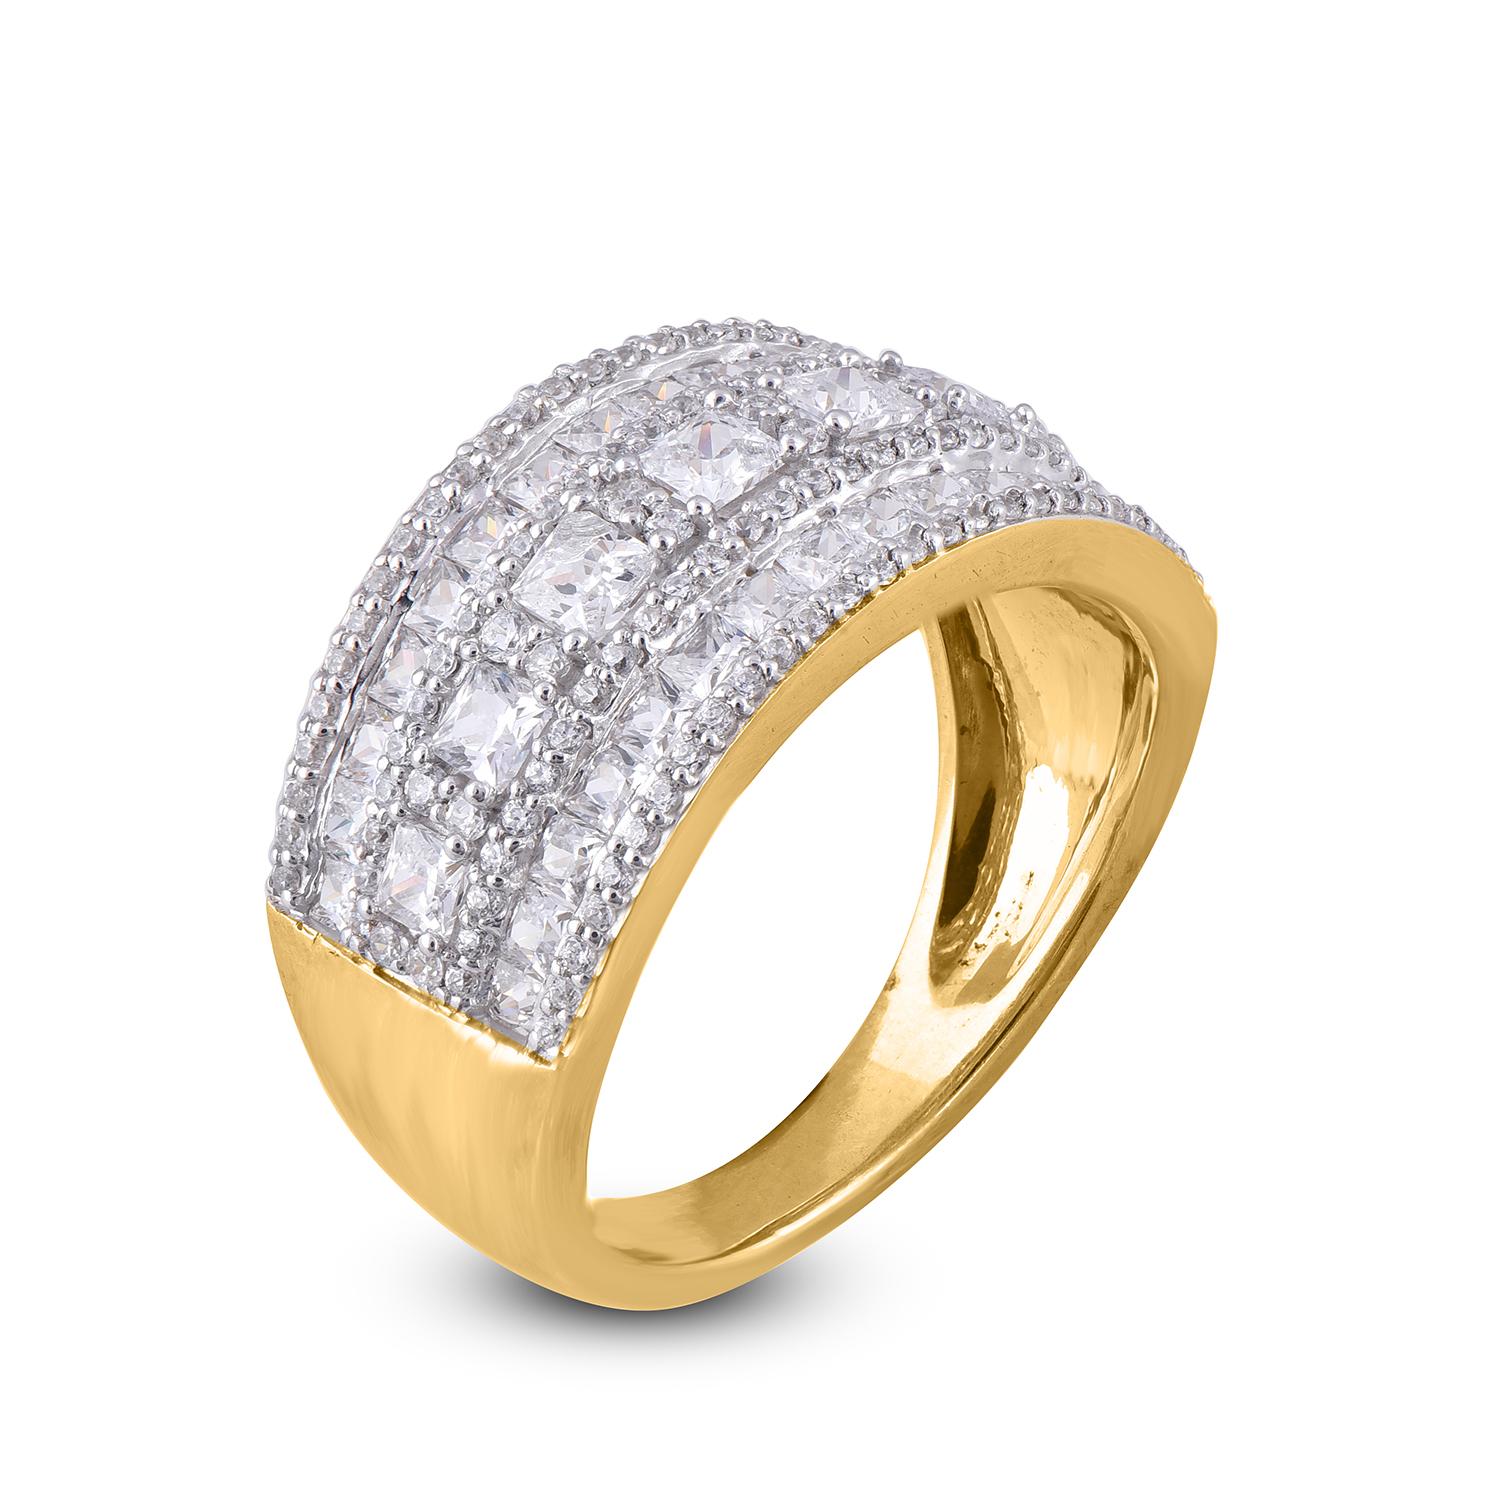 Exquisite 14 Karat Yellow gold wedding band featuring 124 white diamonds and 37 princess cut diamond. This ring is superbly detailed to perfection and set with 2.00 carat of sparkling round diamonds in secured channel and prong setting. The diamonds